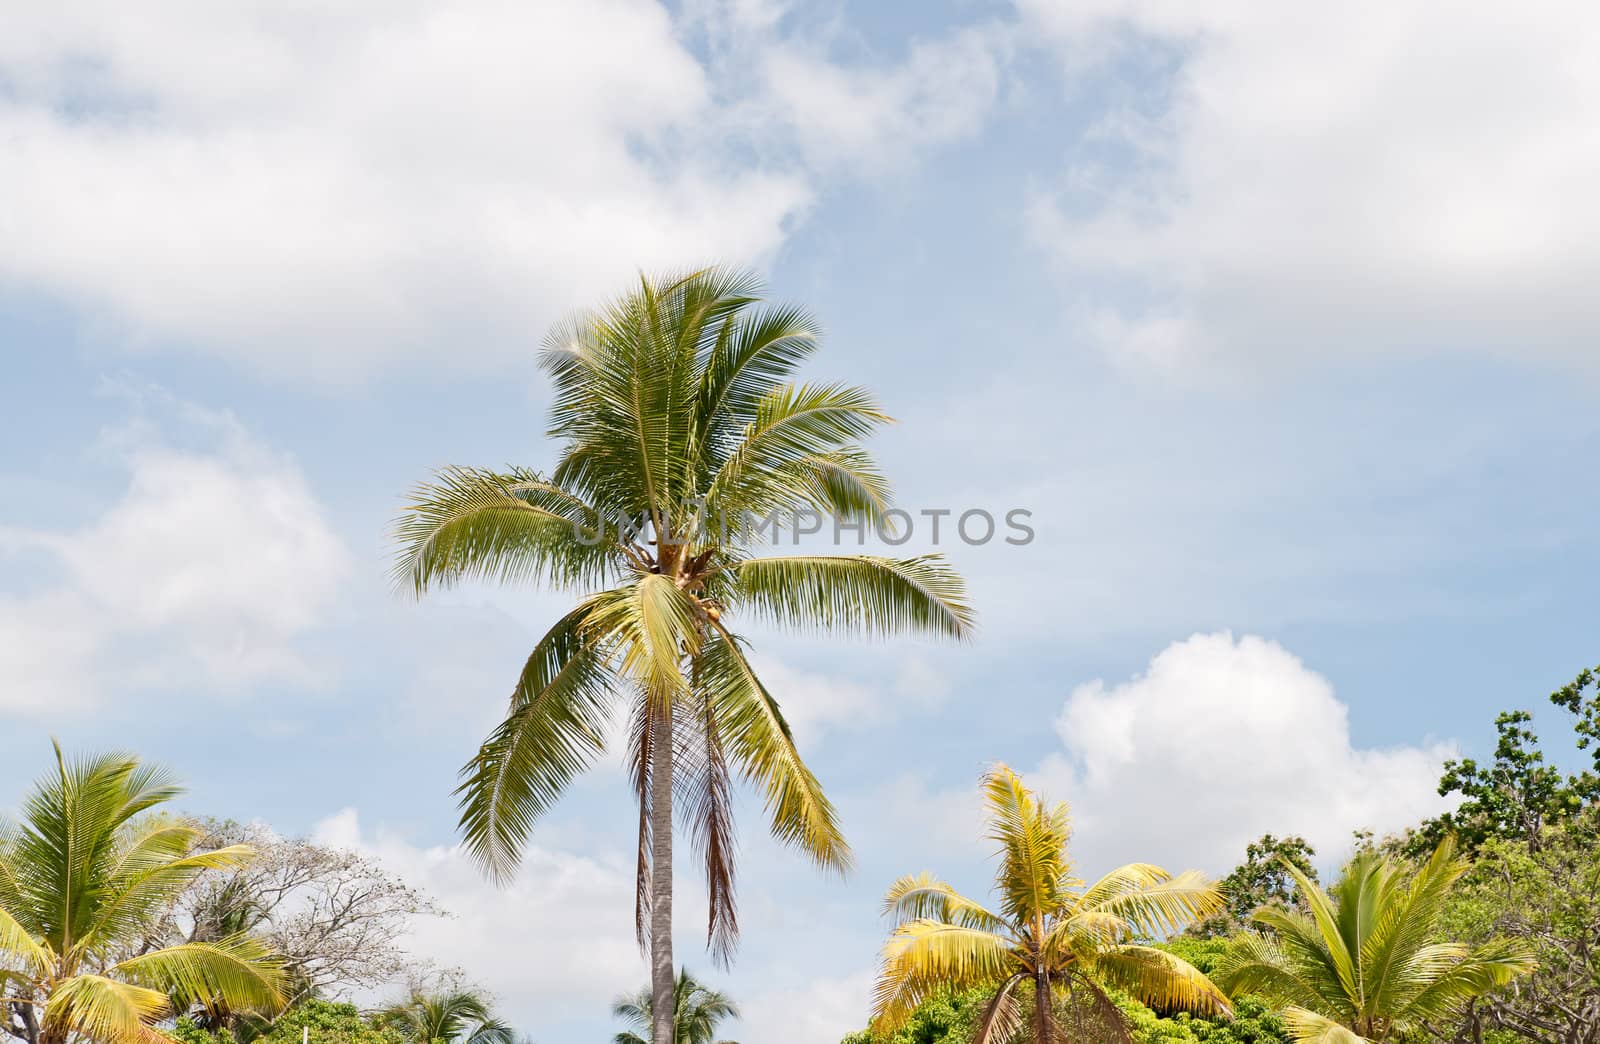 Palm tree over a blue sky with clouds